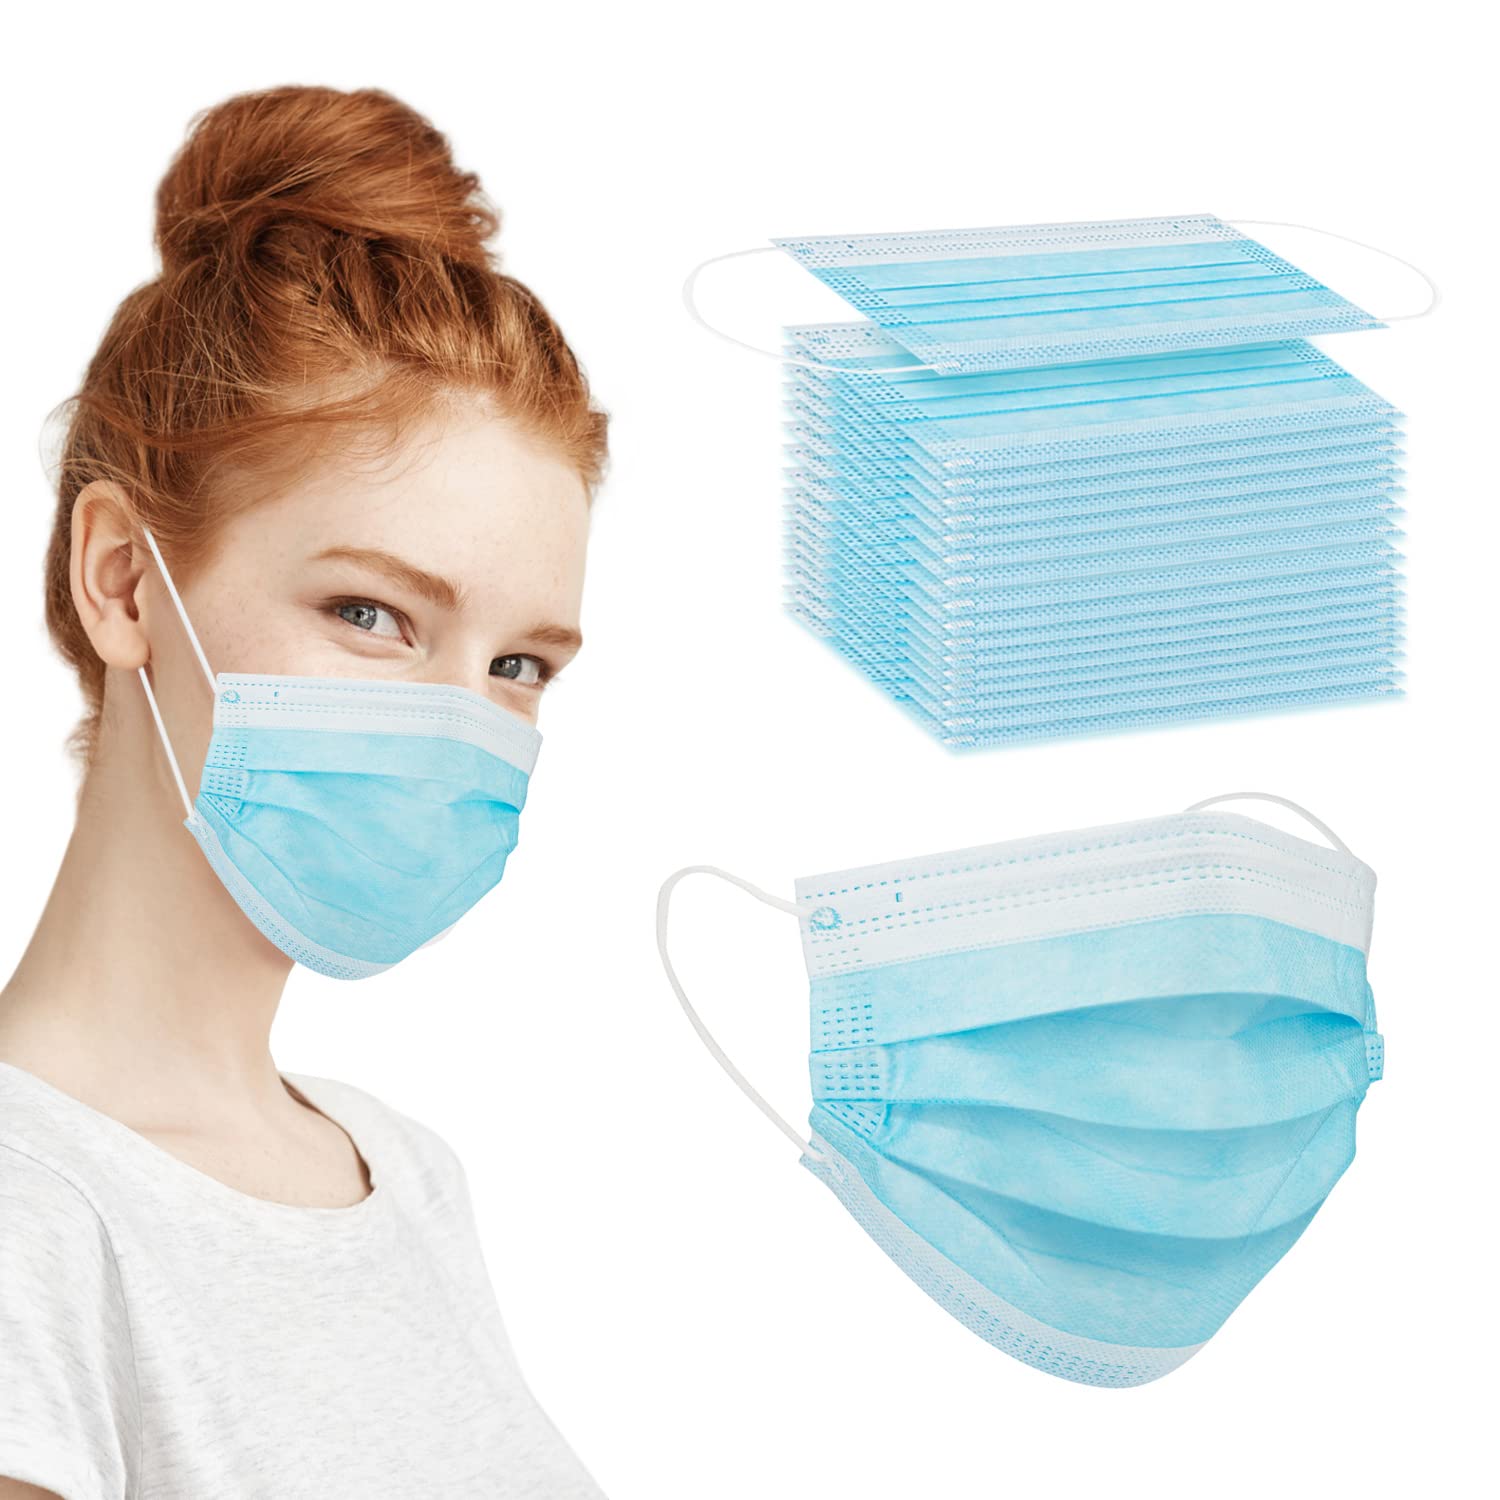 Disposable Face Masks/ 3Ply Safety Face Masks- 50PCS - 3 Layers Blue Protective Face Mask For Daily Use, Breathable Facemasks, Anti-Dust Disposable Mask with Earloop for Personal Care